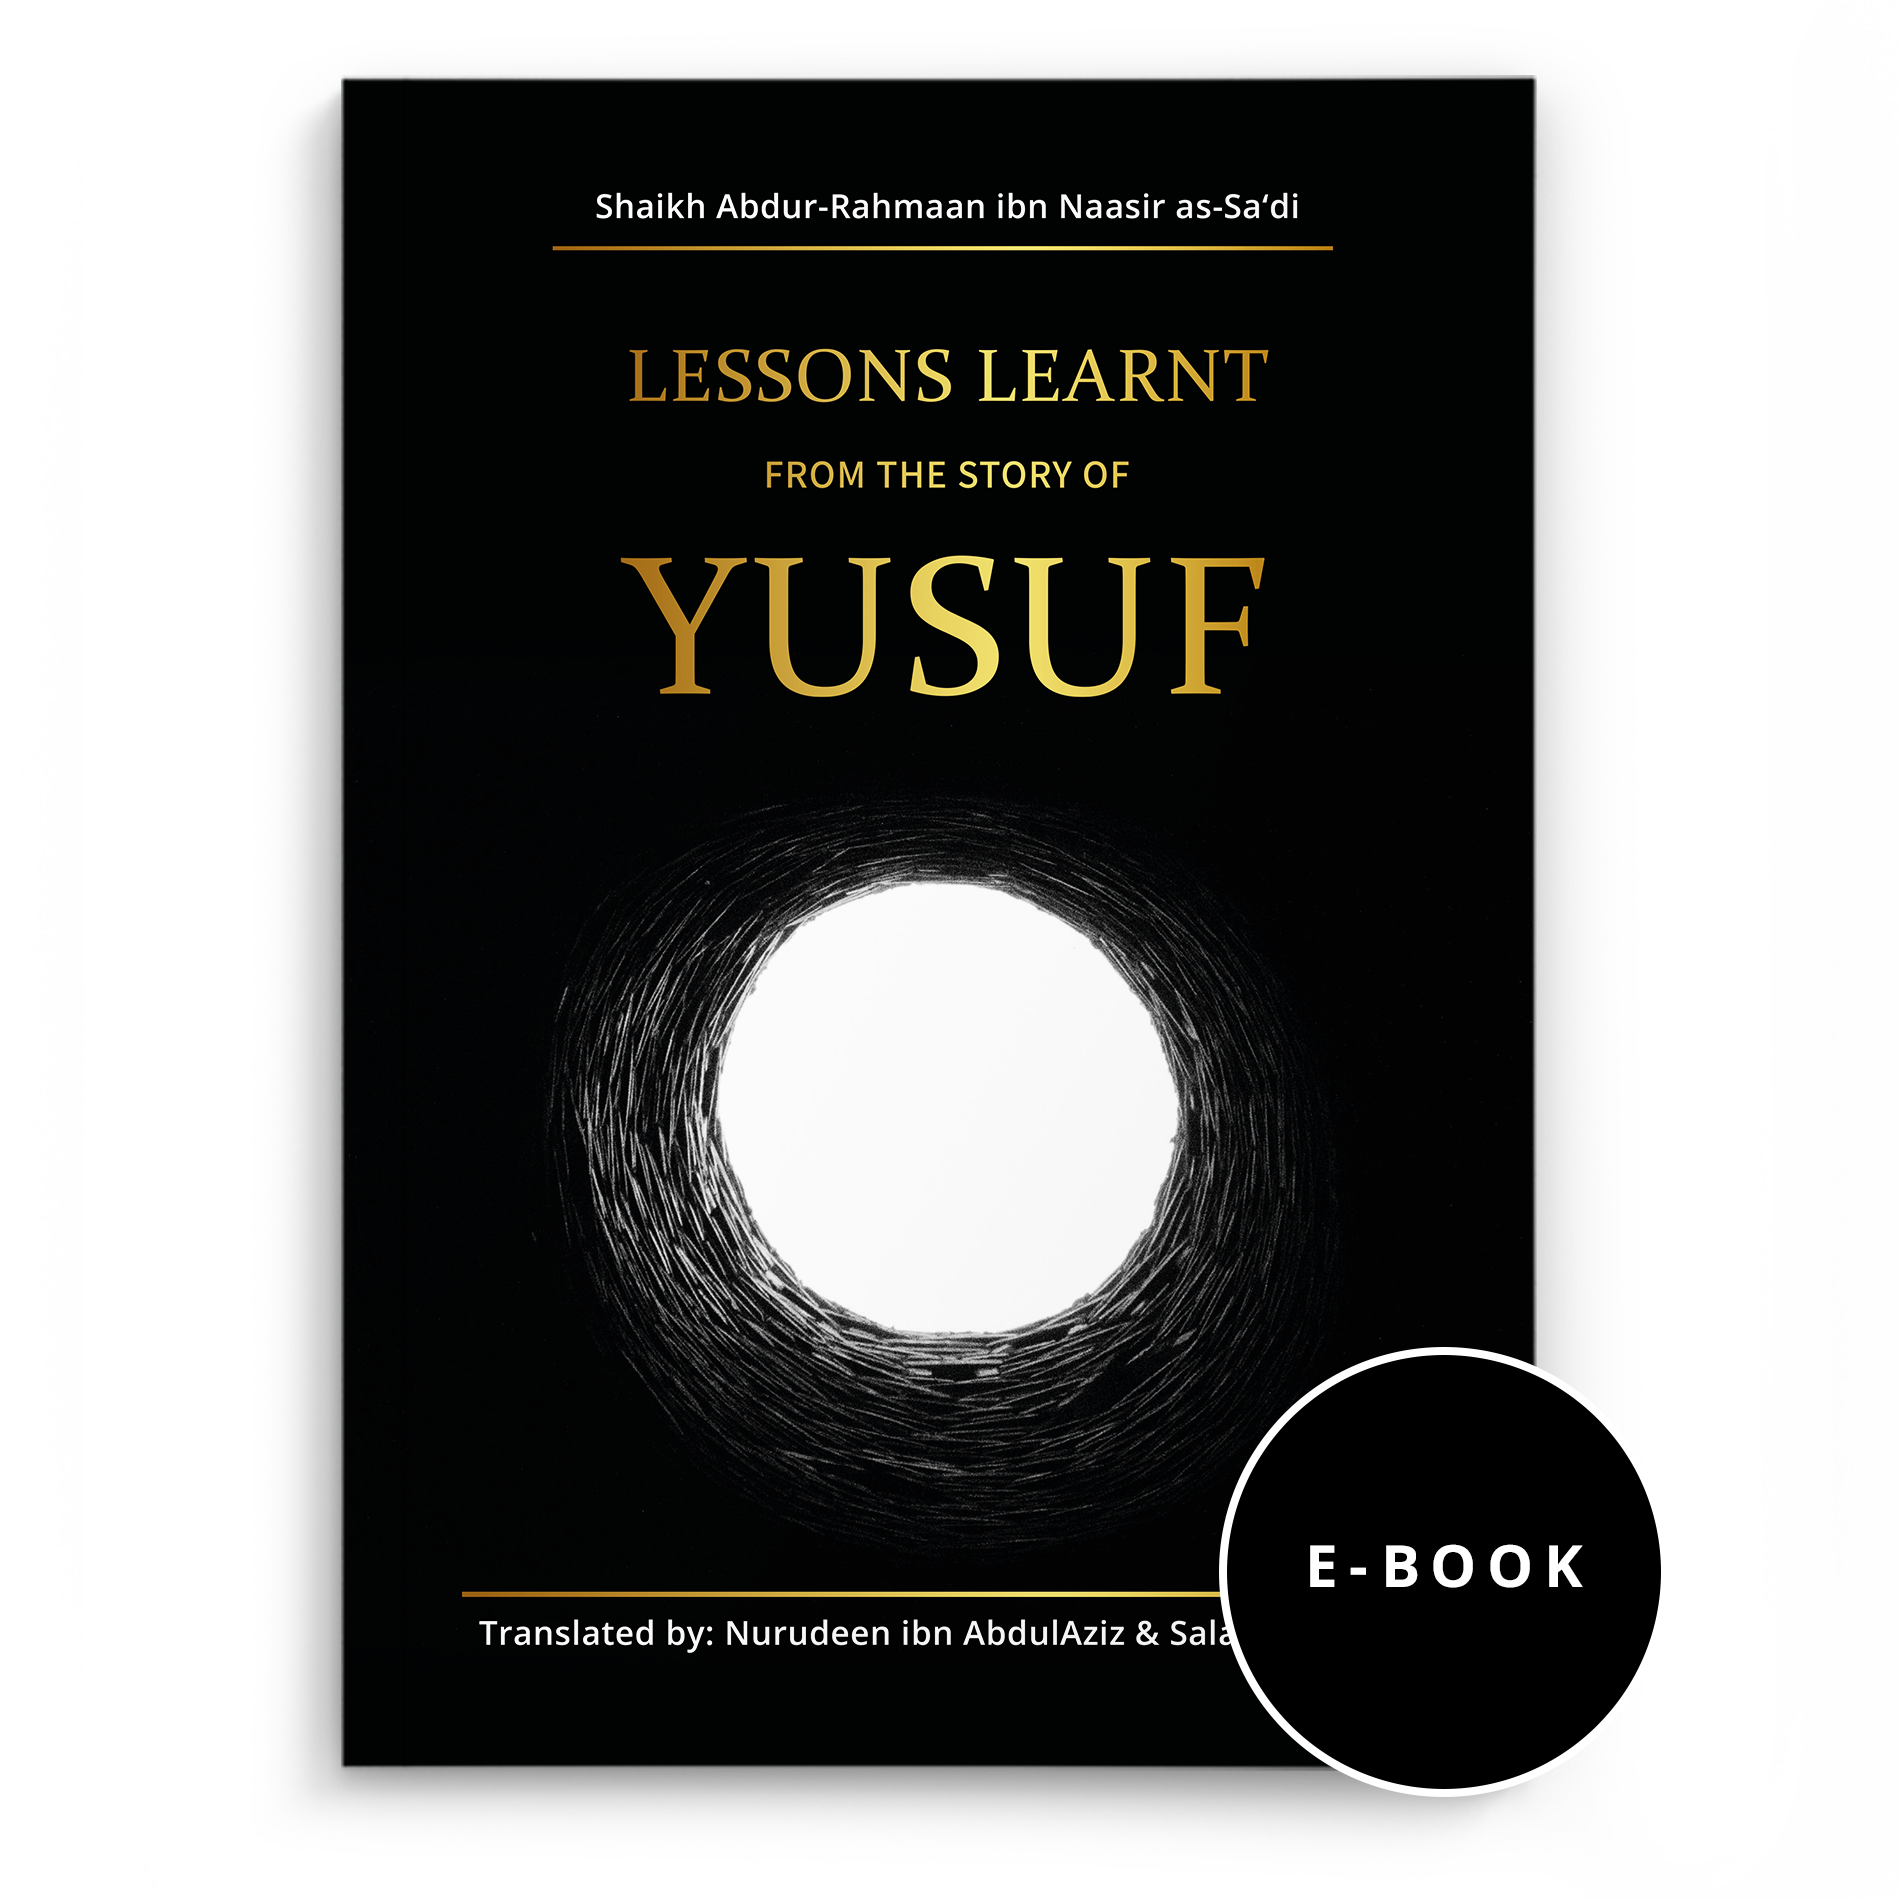 E-book:  of Lessons Learnt from the Story of Yūsuf